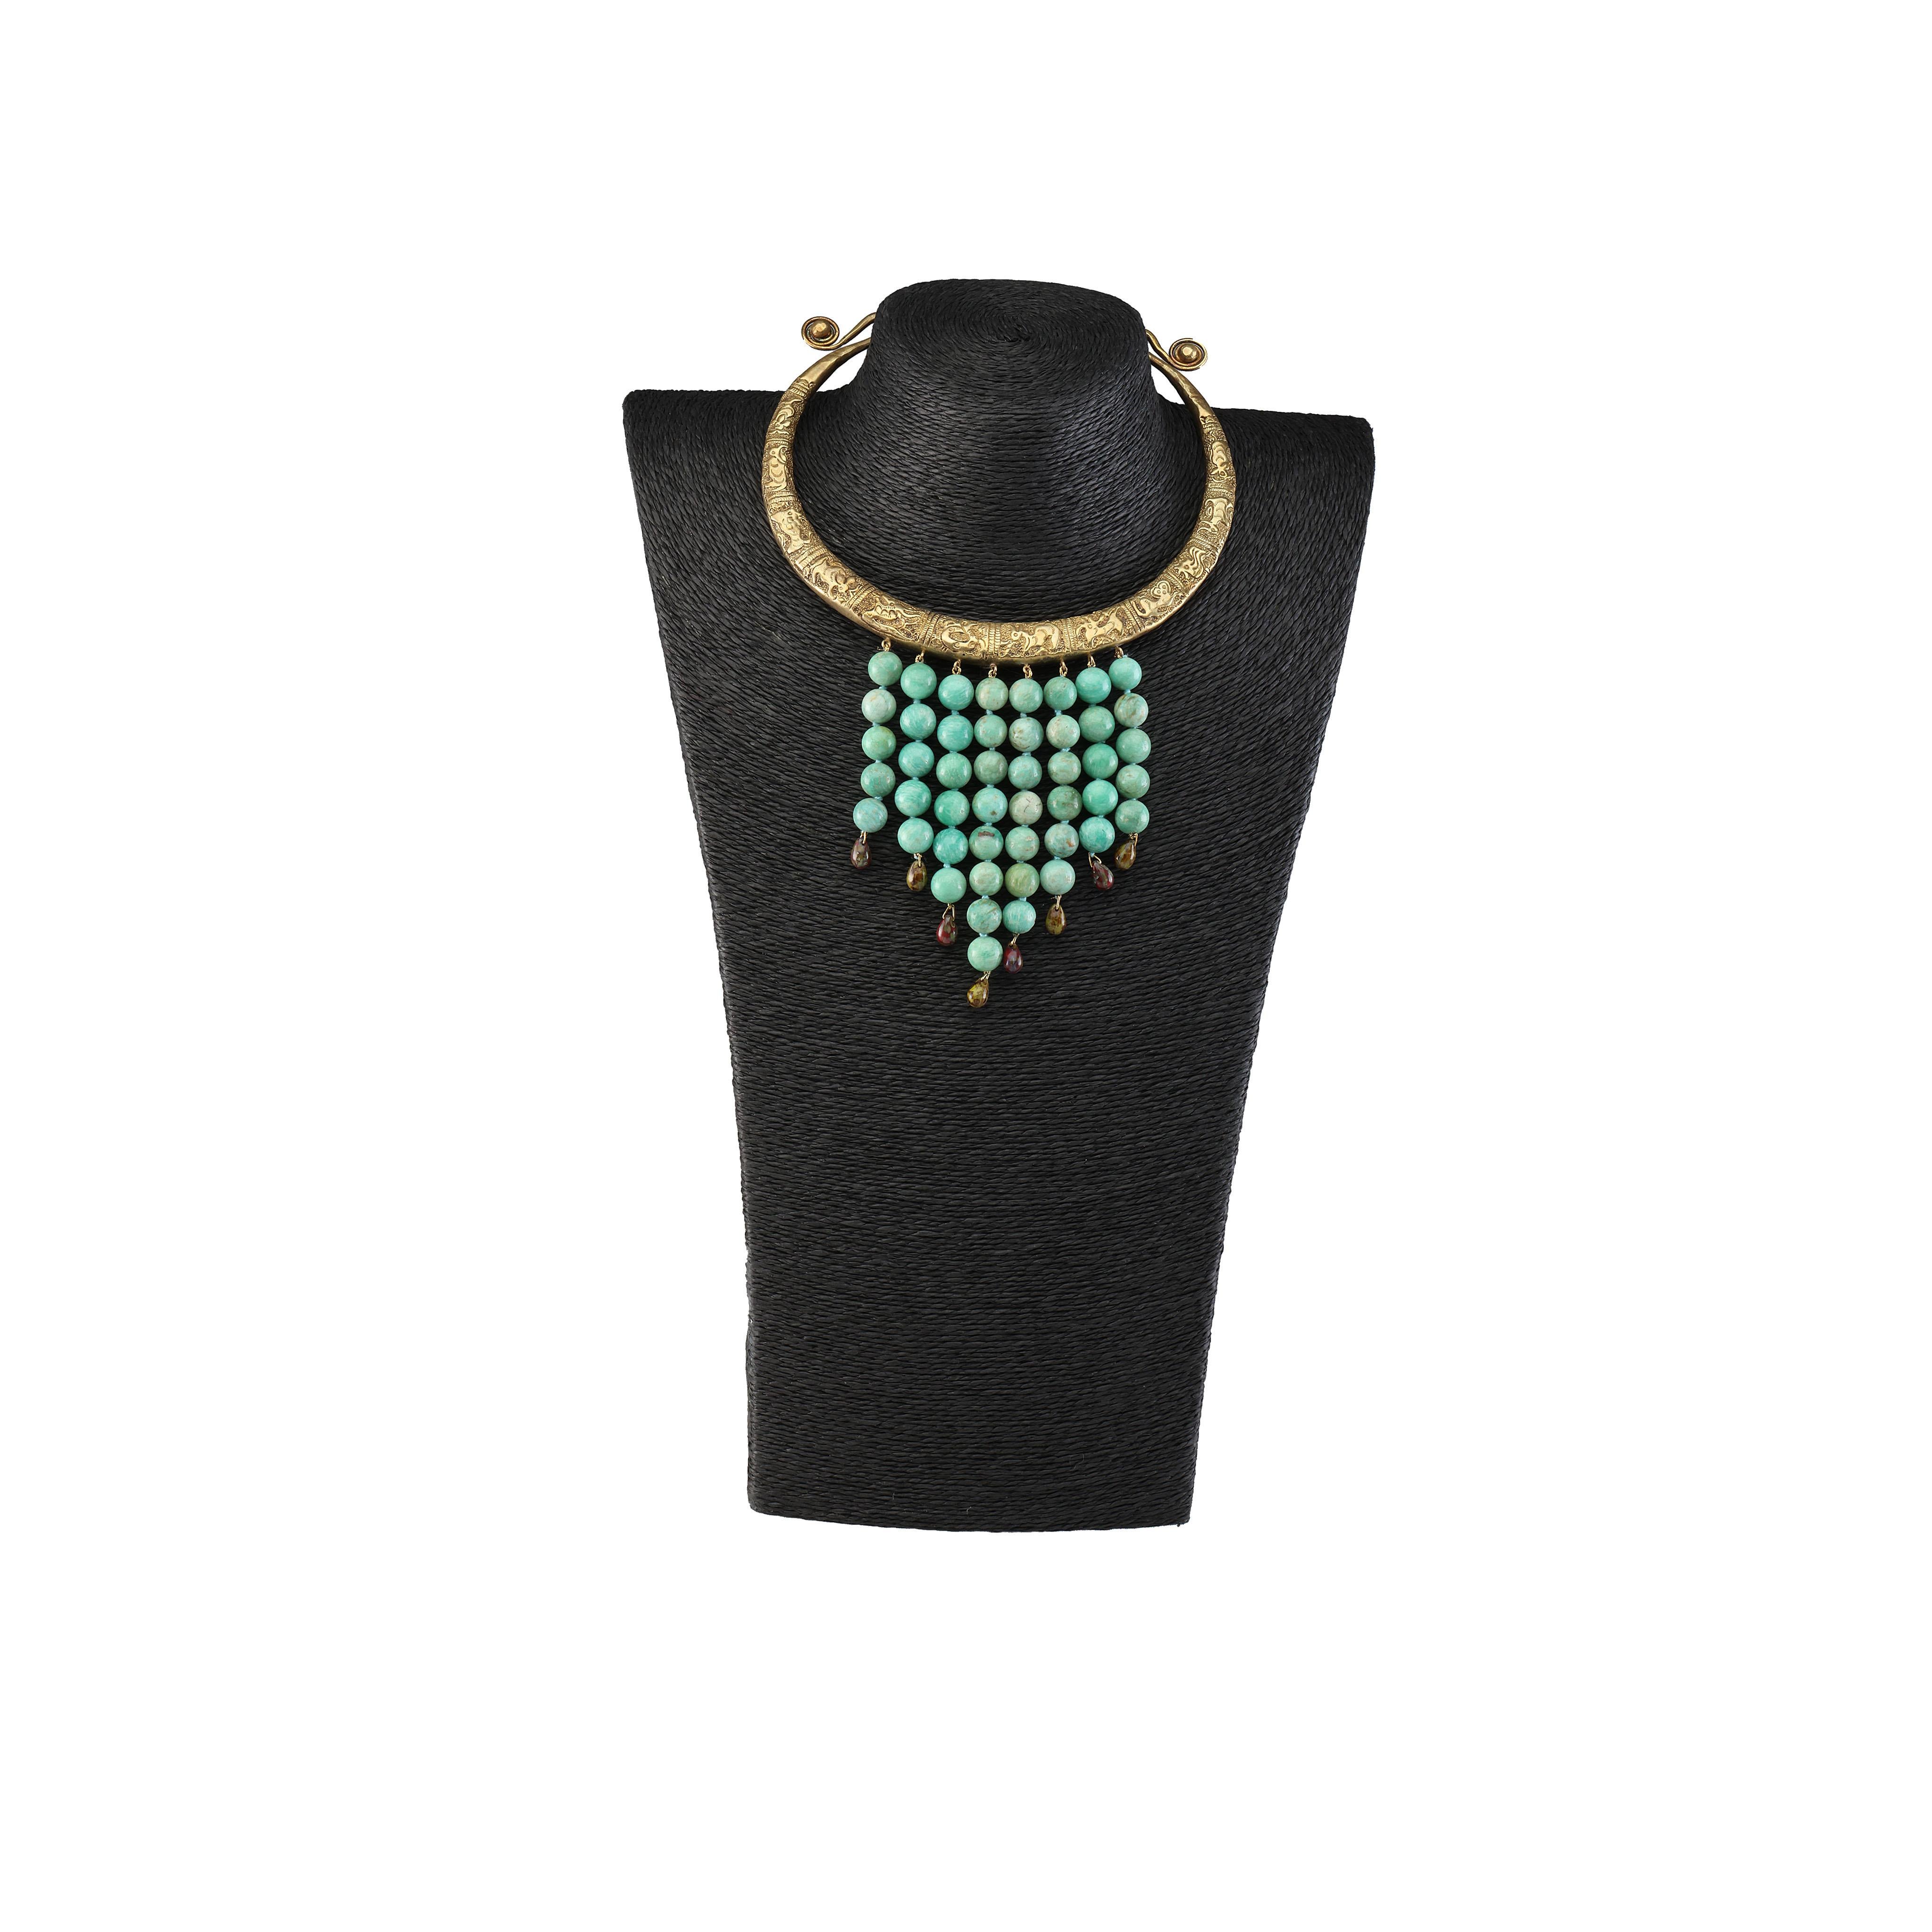 Very special necklace made with old Chinese zodiac sign rigid necklace, with amazonite fringe and jasper drops.
All Giulia Colussi jewelry is new and has never been previously owned or worn. Each item will arrive at your door beautifully gift